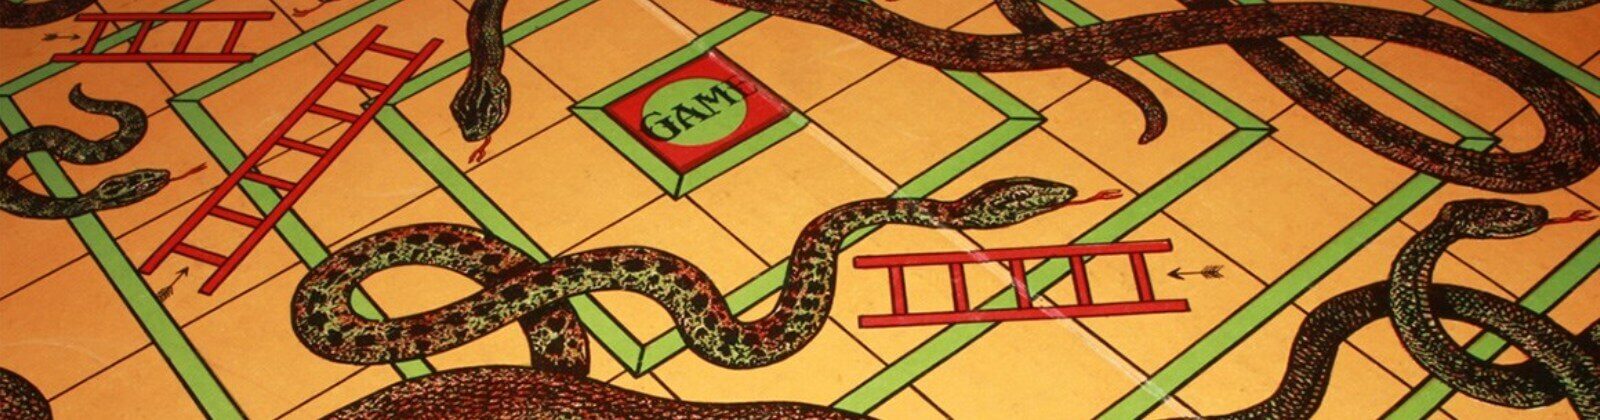 a game of snakes and ladders